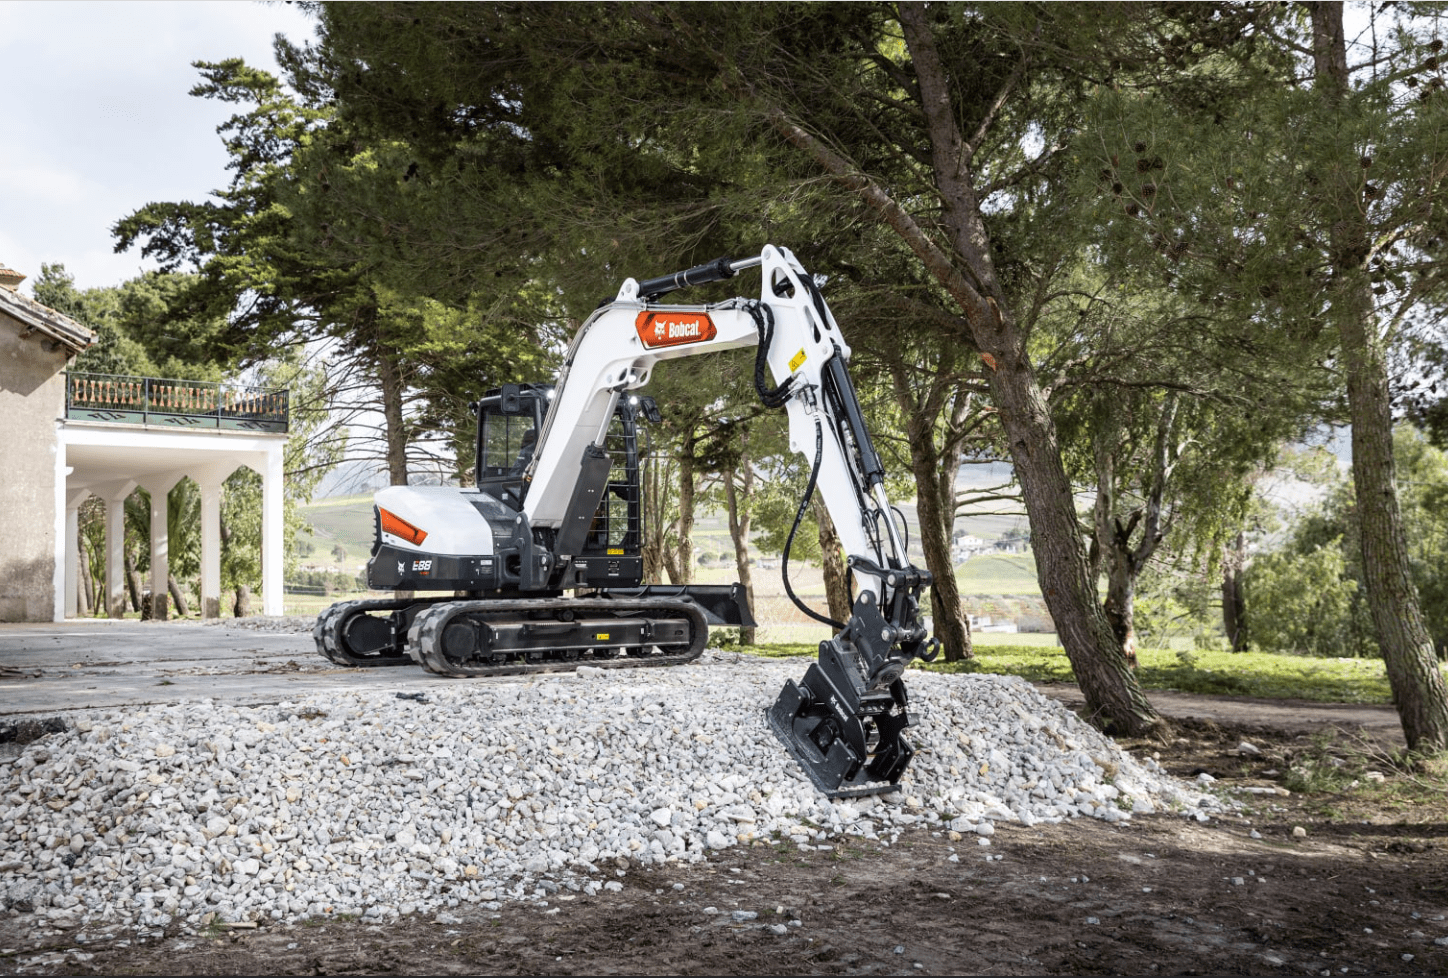 Browse Specs and more for the Bobcat E88 Compact Excavator - Bobcat of North Texas